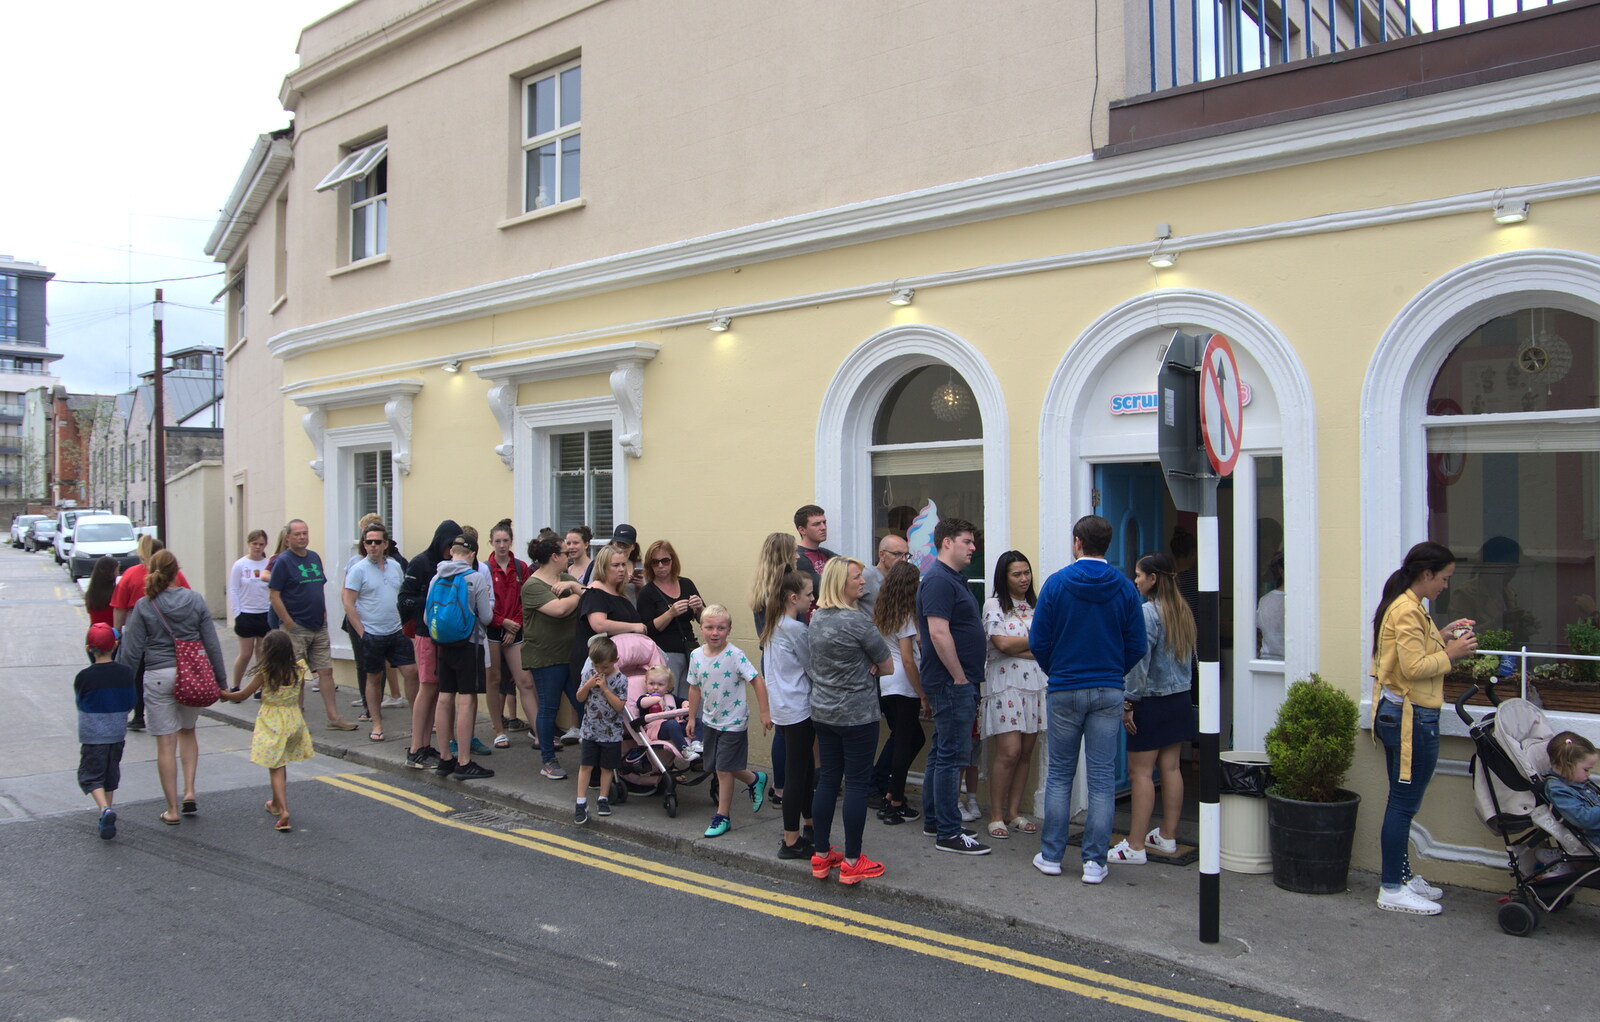 The queue at Scrumdiddly's from The Dún Laoghaire 10k Run, County Dublin, Ireland - 6th August 2018